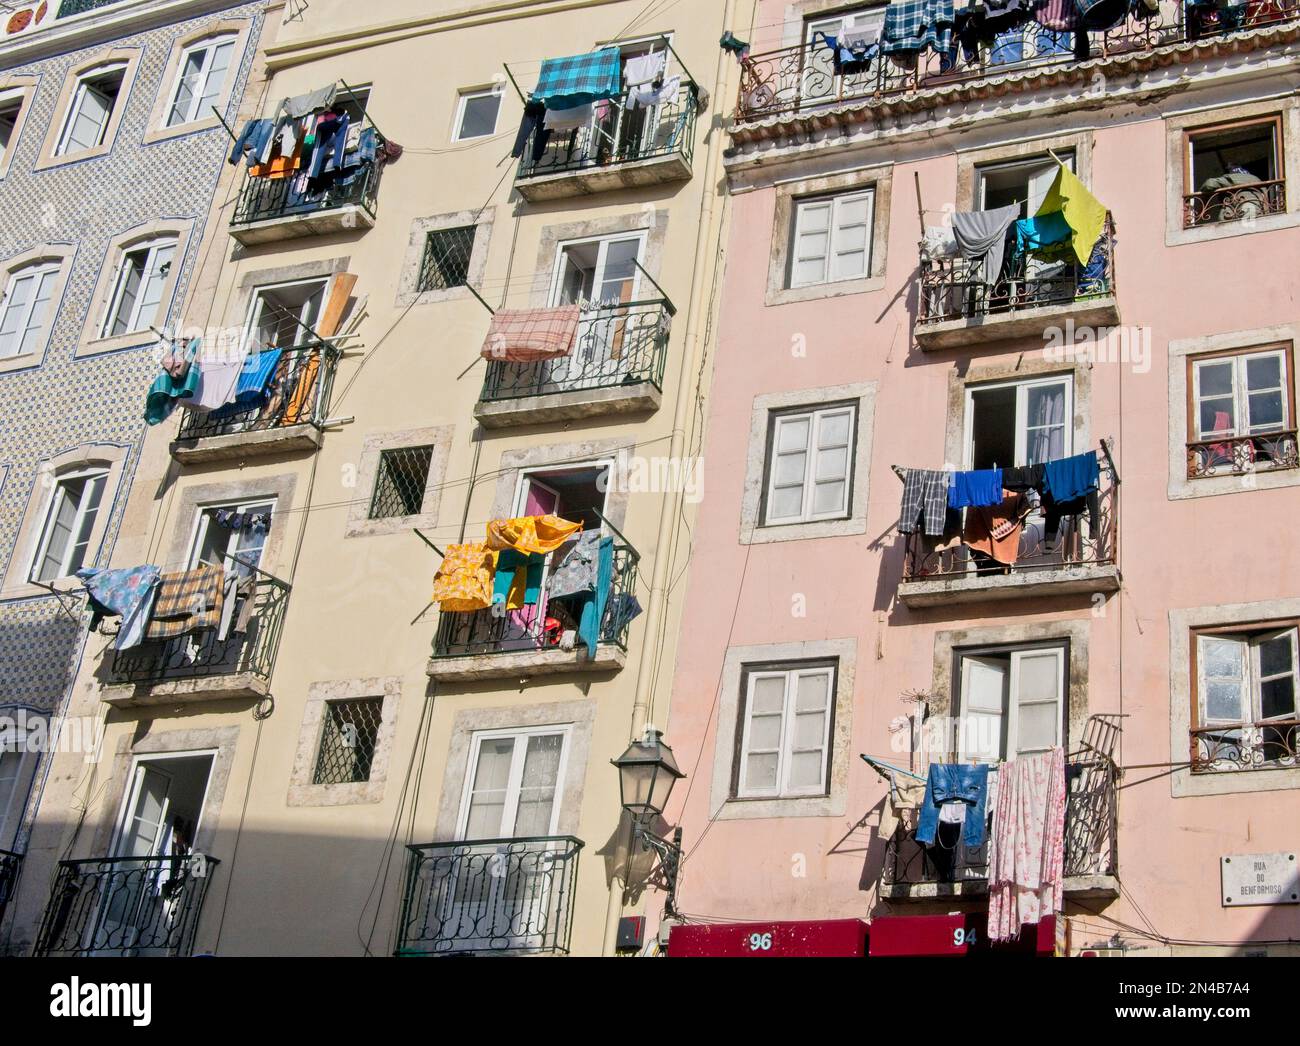 A wall of balconies with clotheslines and laundry air drying in Lisbon, Portugal Stock Photo